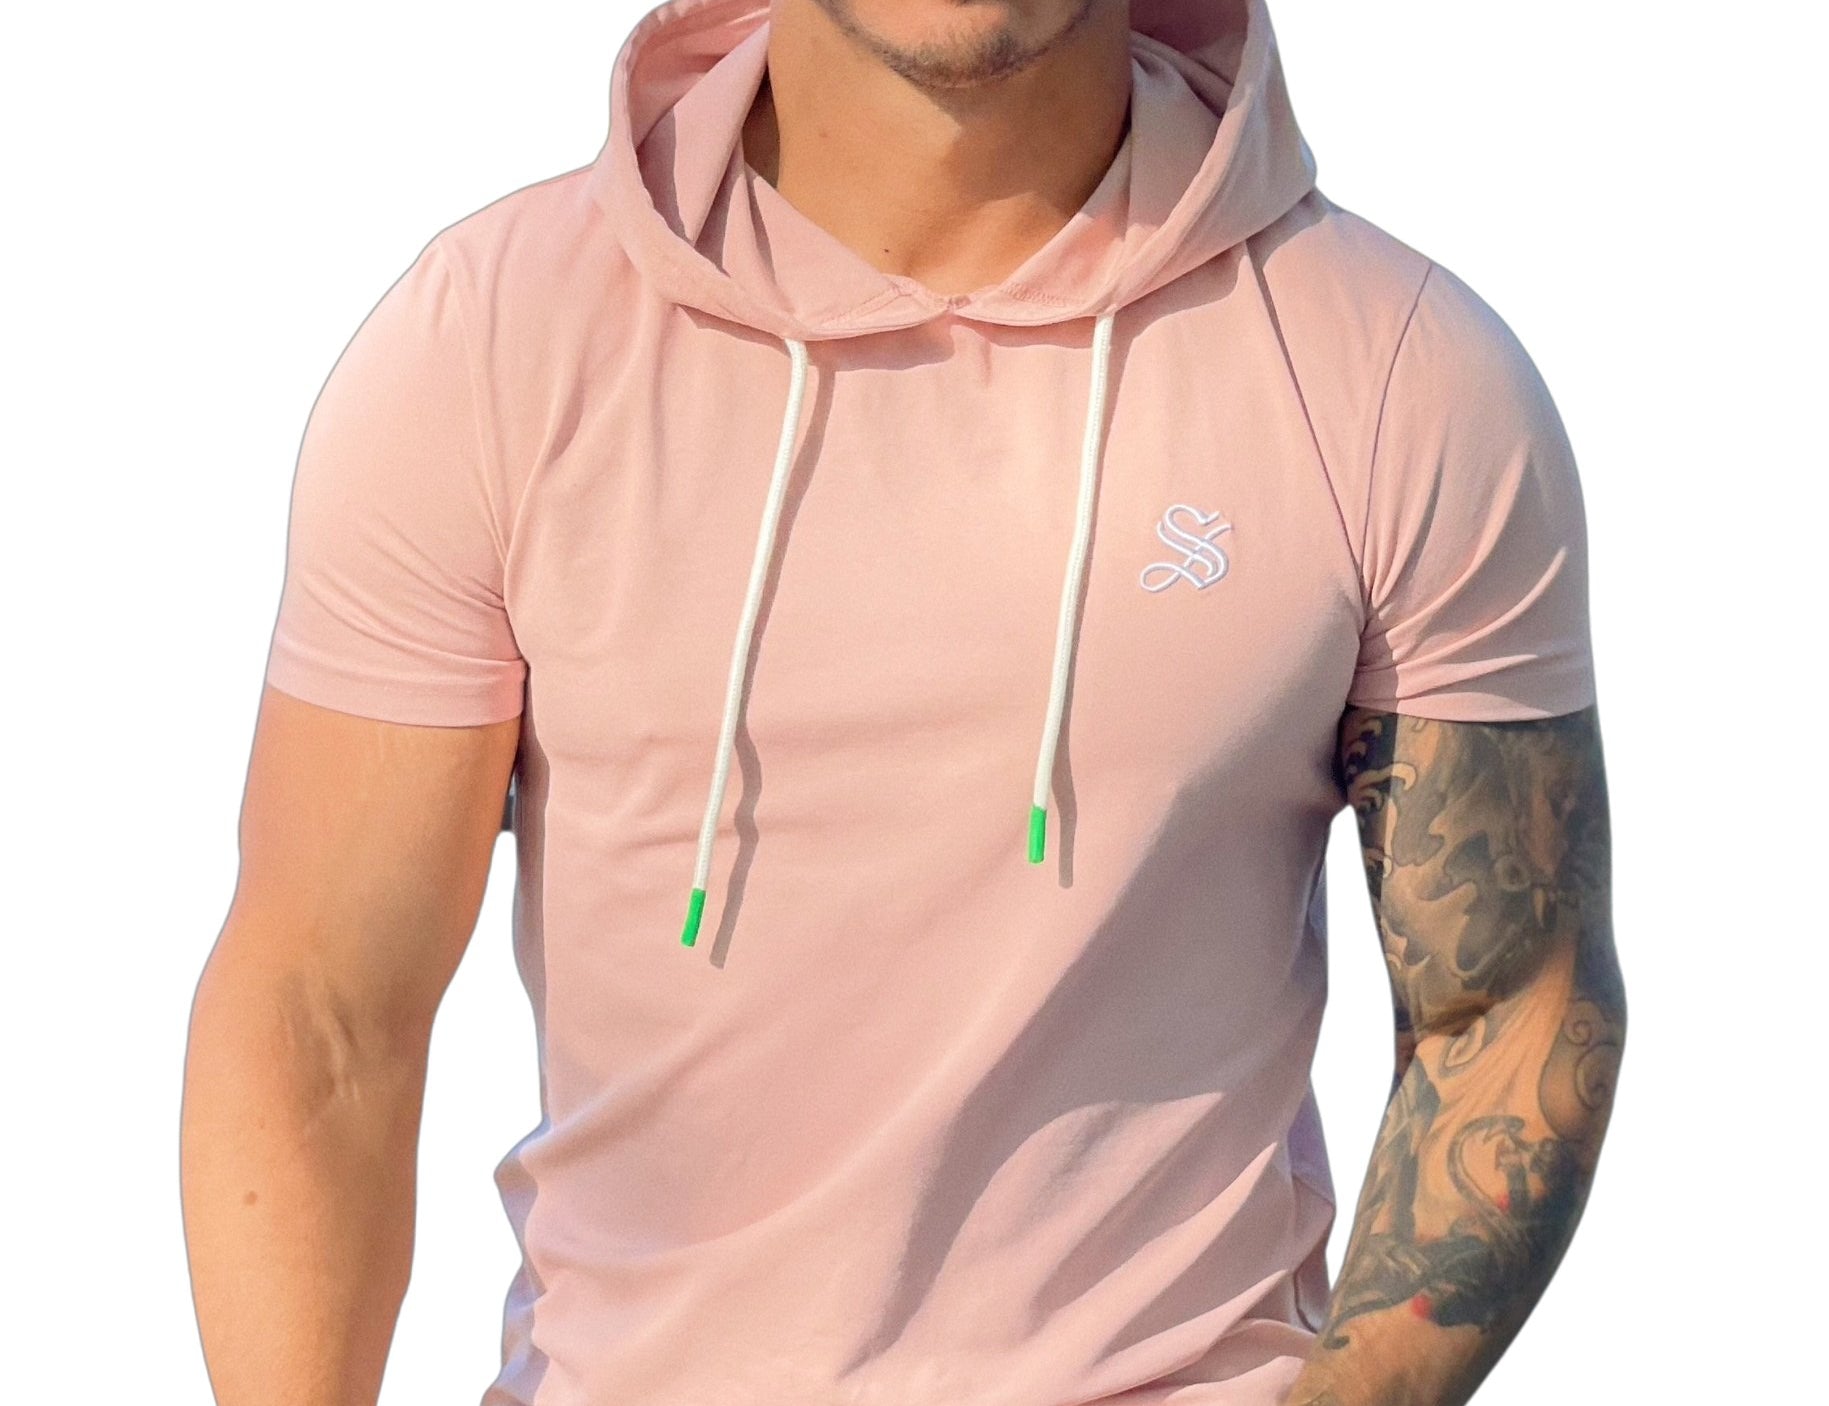 Flamingo - Pink T-shirt for Men - Sarman Fashion - Wholesale Clothing Fashion Brand for Men from Canada